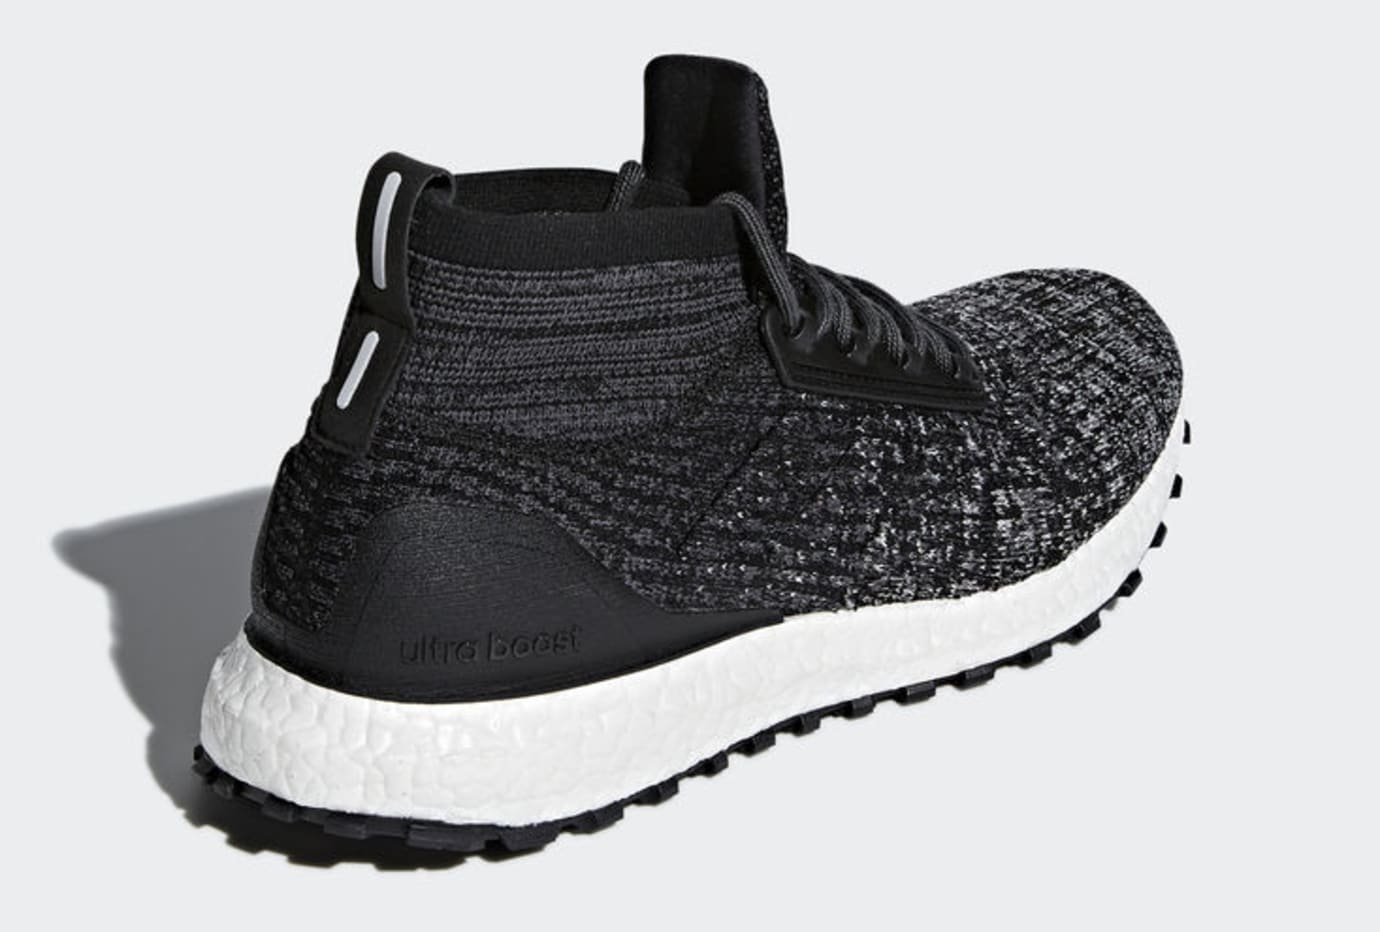 Reigning Champ x Adidas Ultra Boost Terrain Release Date | Sole Collector